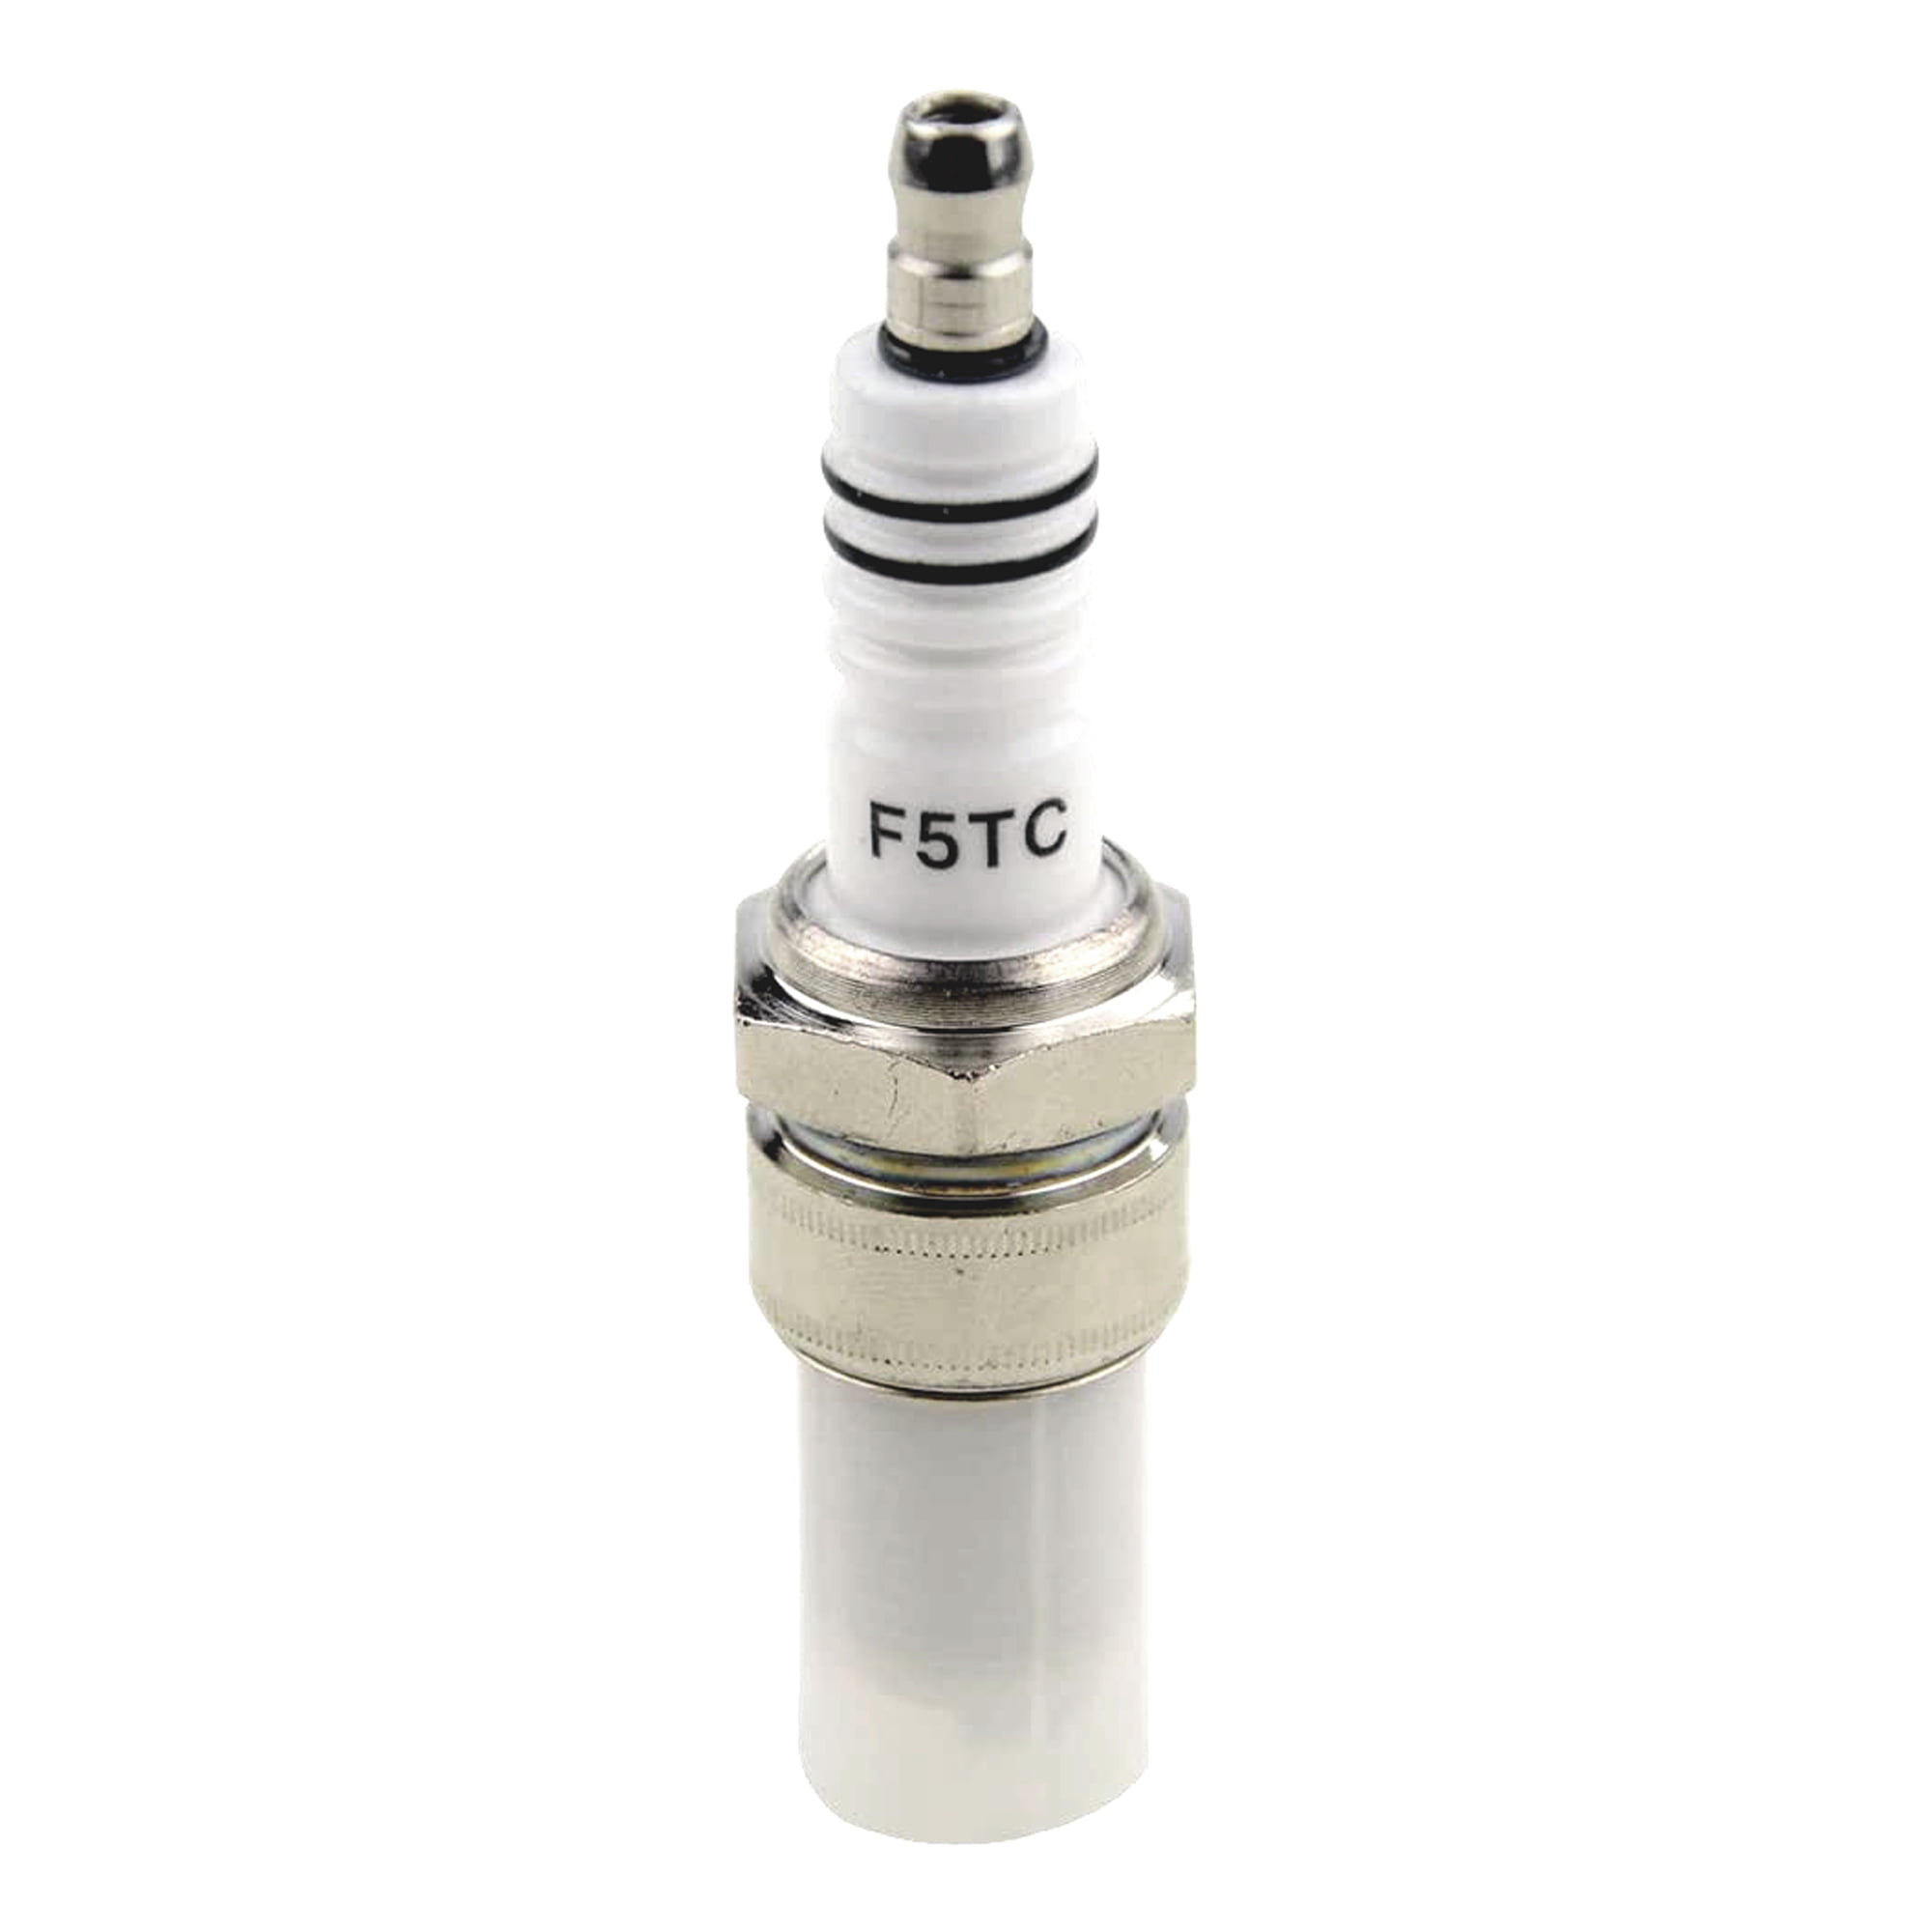 131-031 Torch Spark Plug For Torch F5TC 